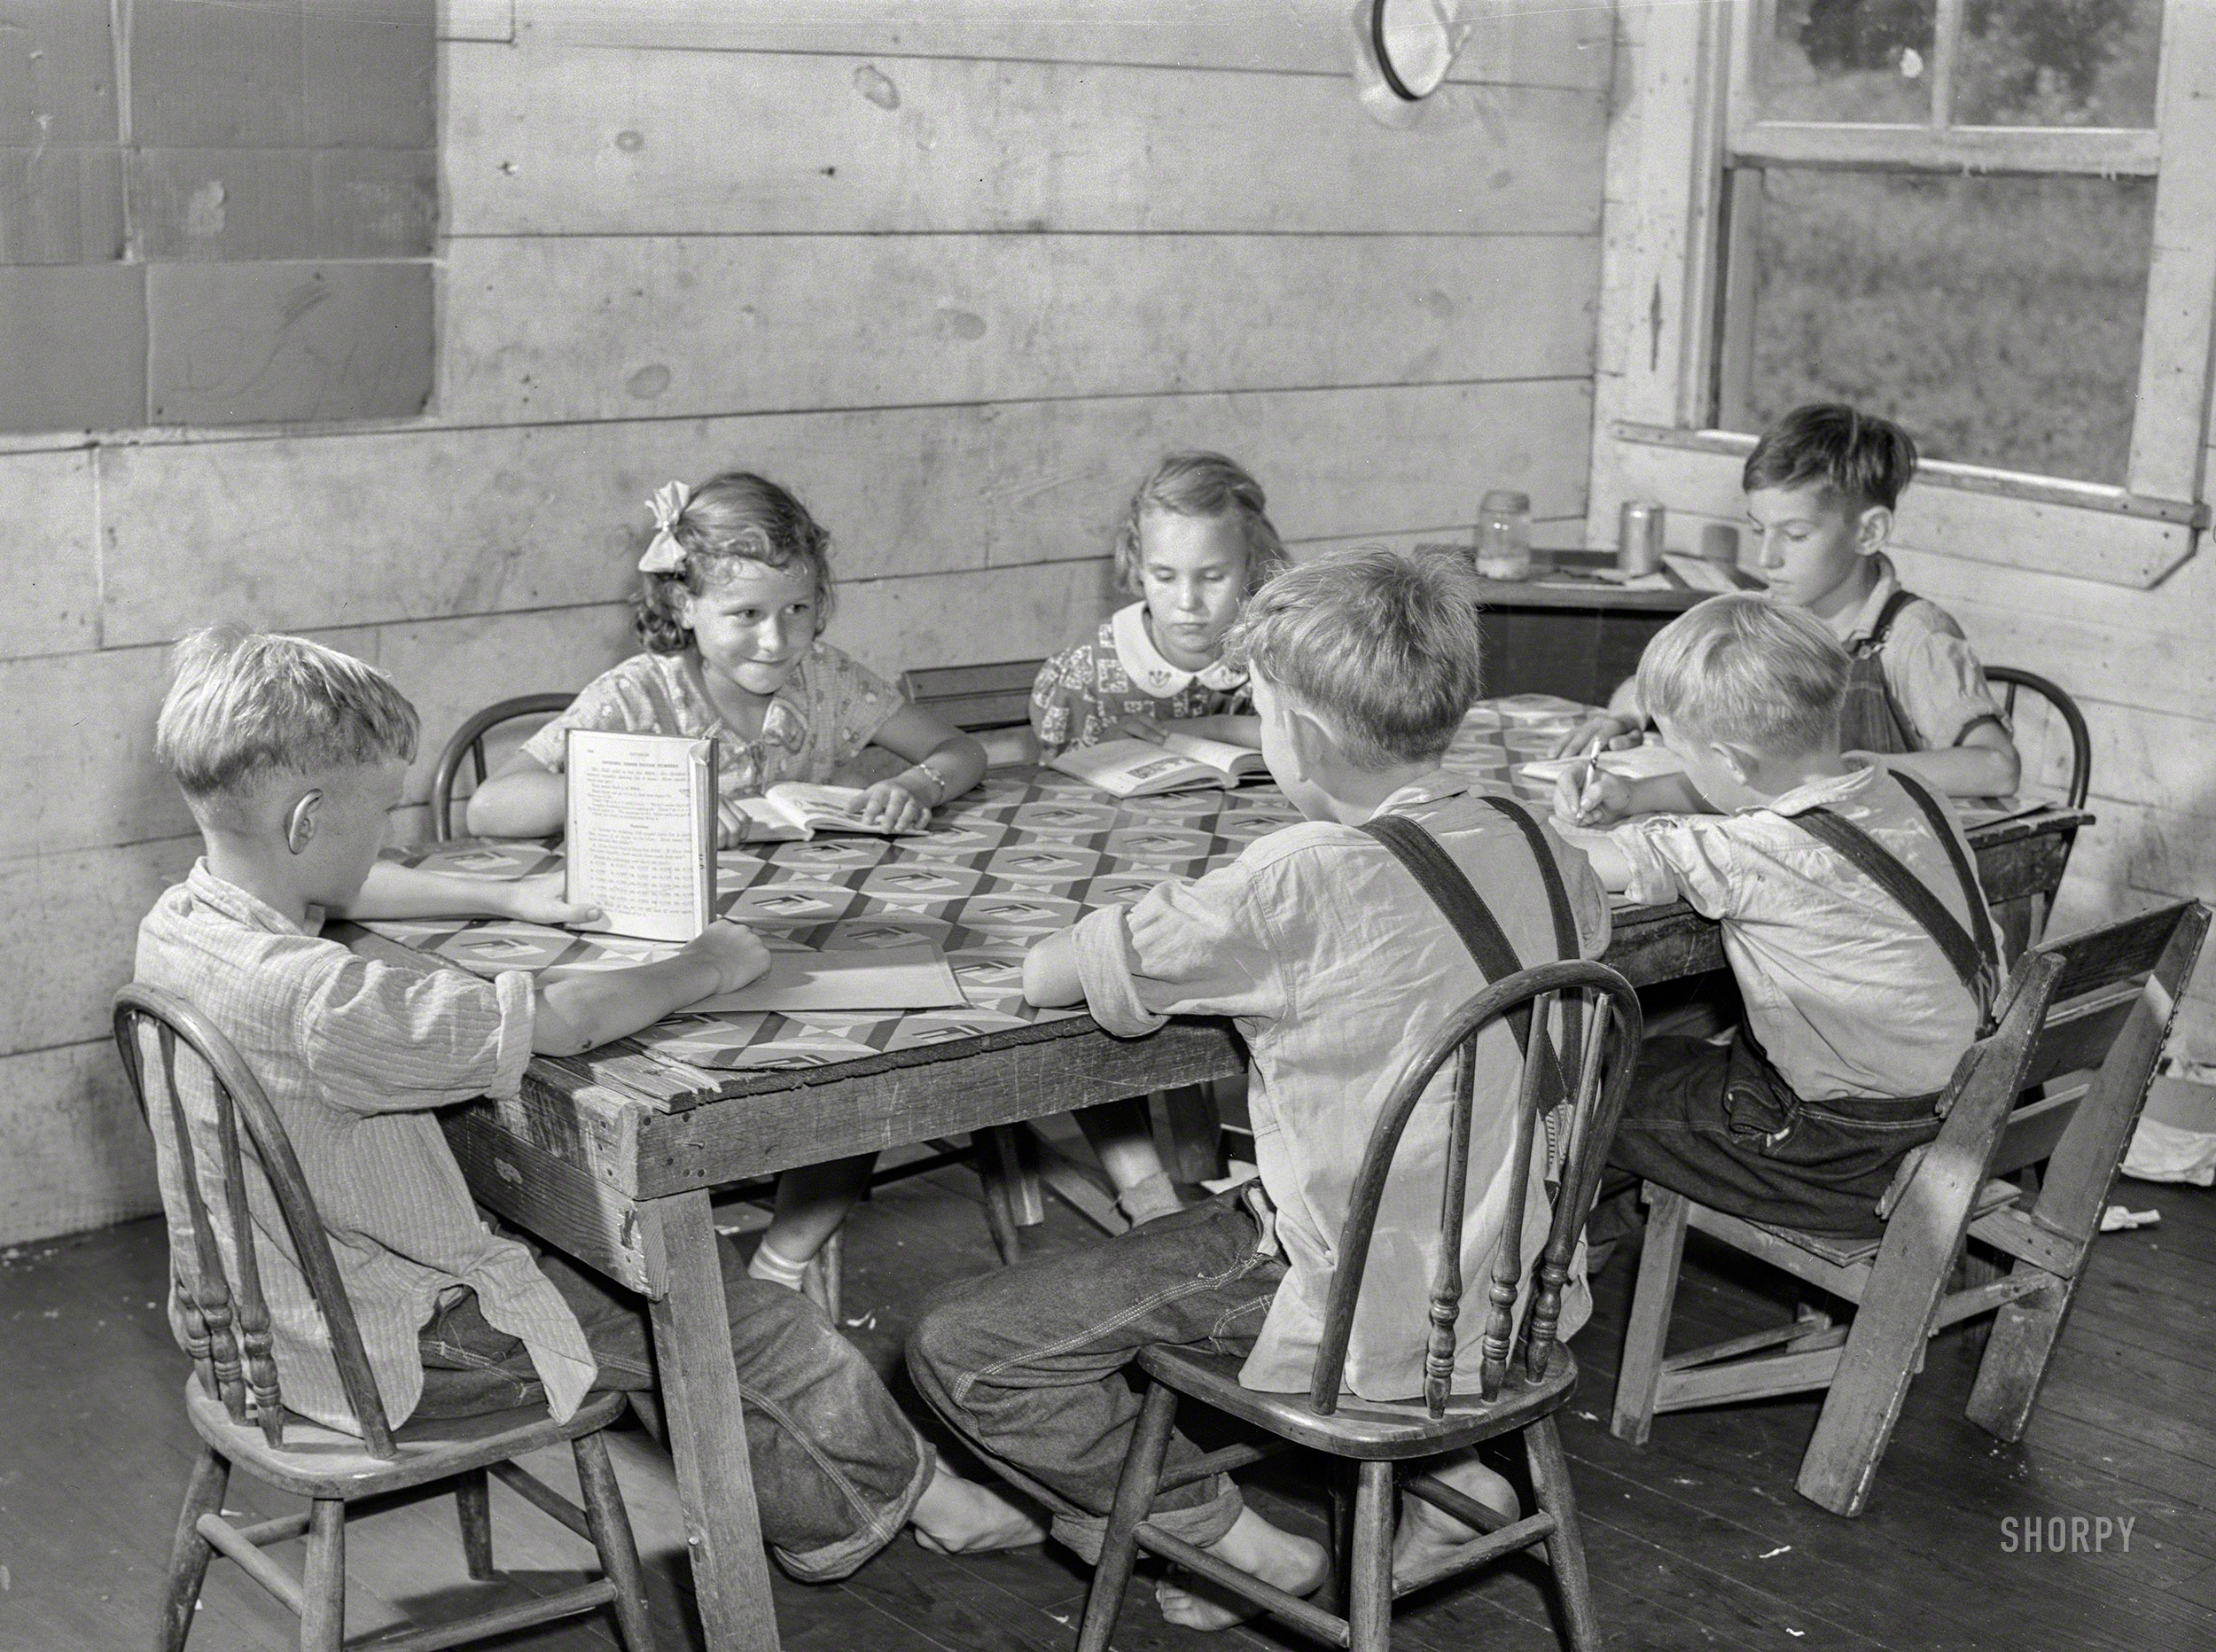 August 1940. "One-room school in Breathitt County, Kentucky." Medium format negative by Marion Post Wolcott for the Farm Security Administration. View full size.